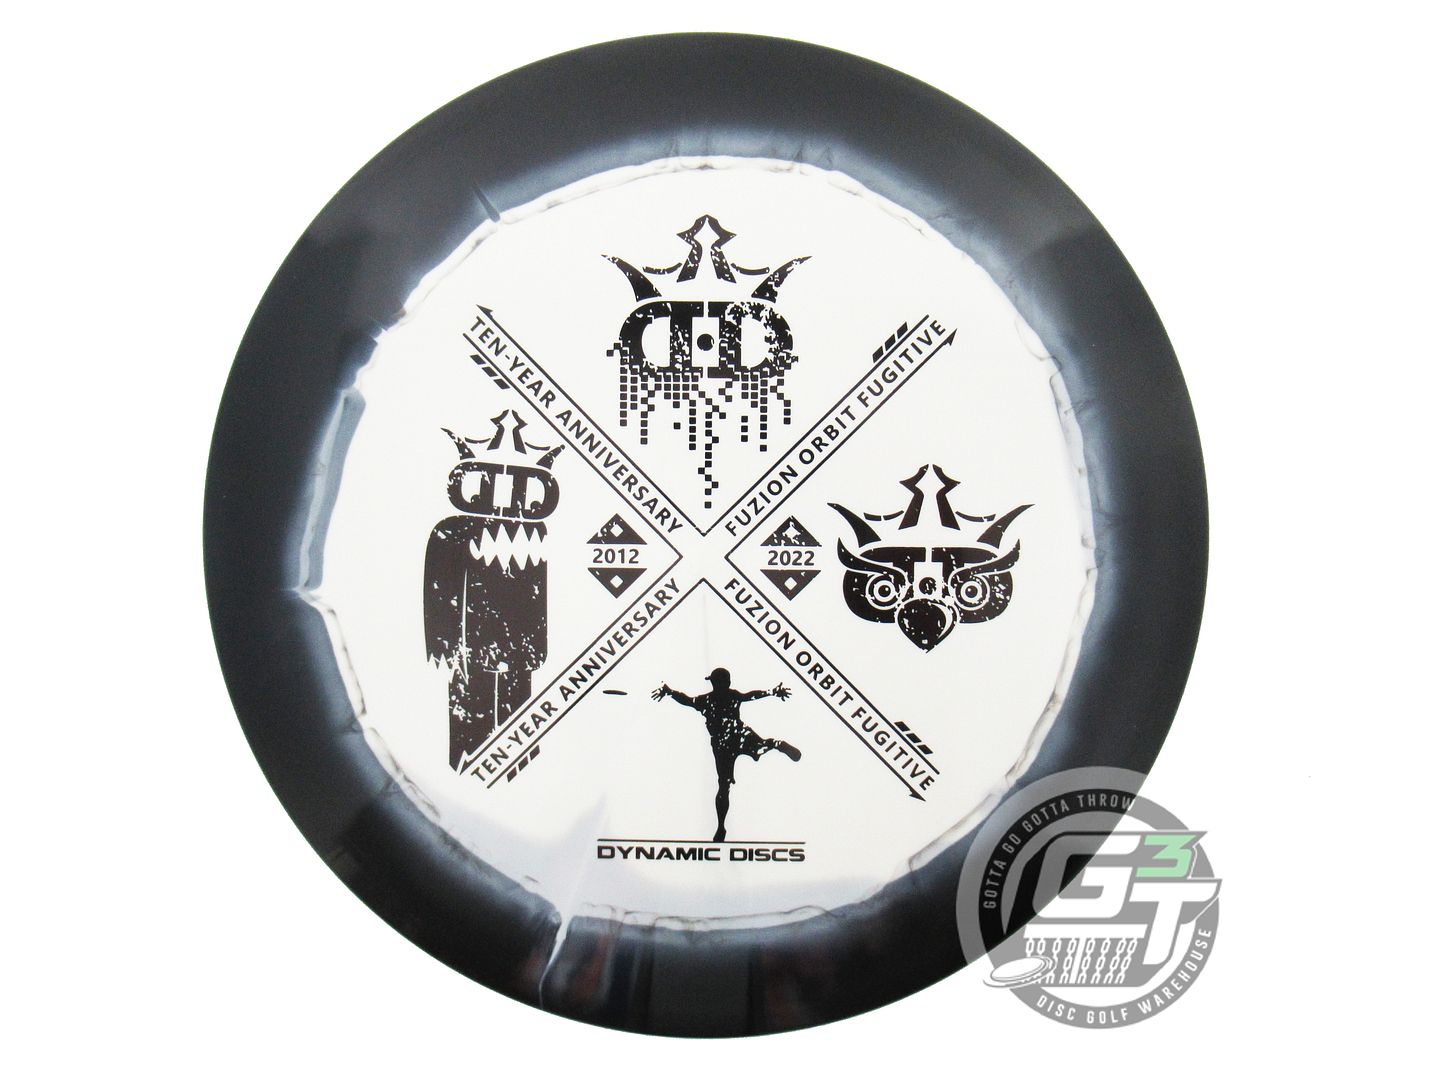 Dynamic Discs Limited Edition 10-Year Anniversary Fuzion Orbit Fugitive Midrange Golf Disc (Individually Listed)